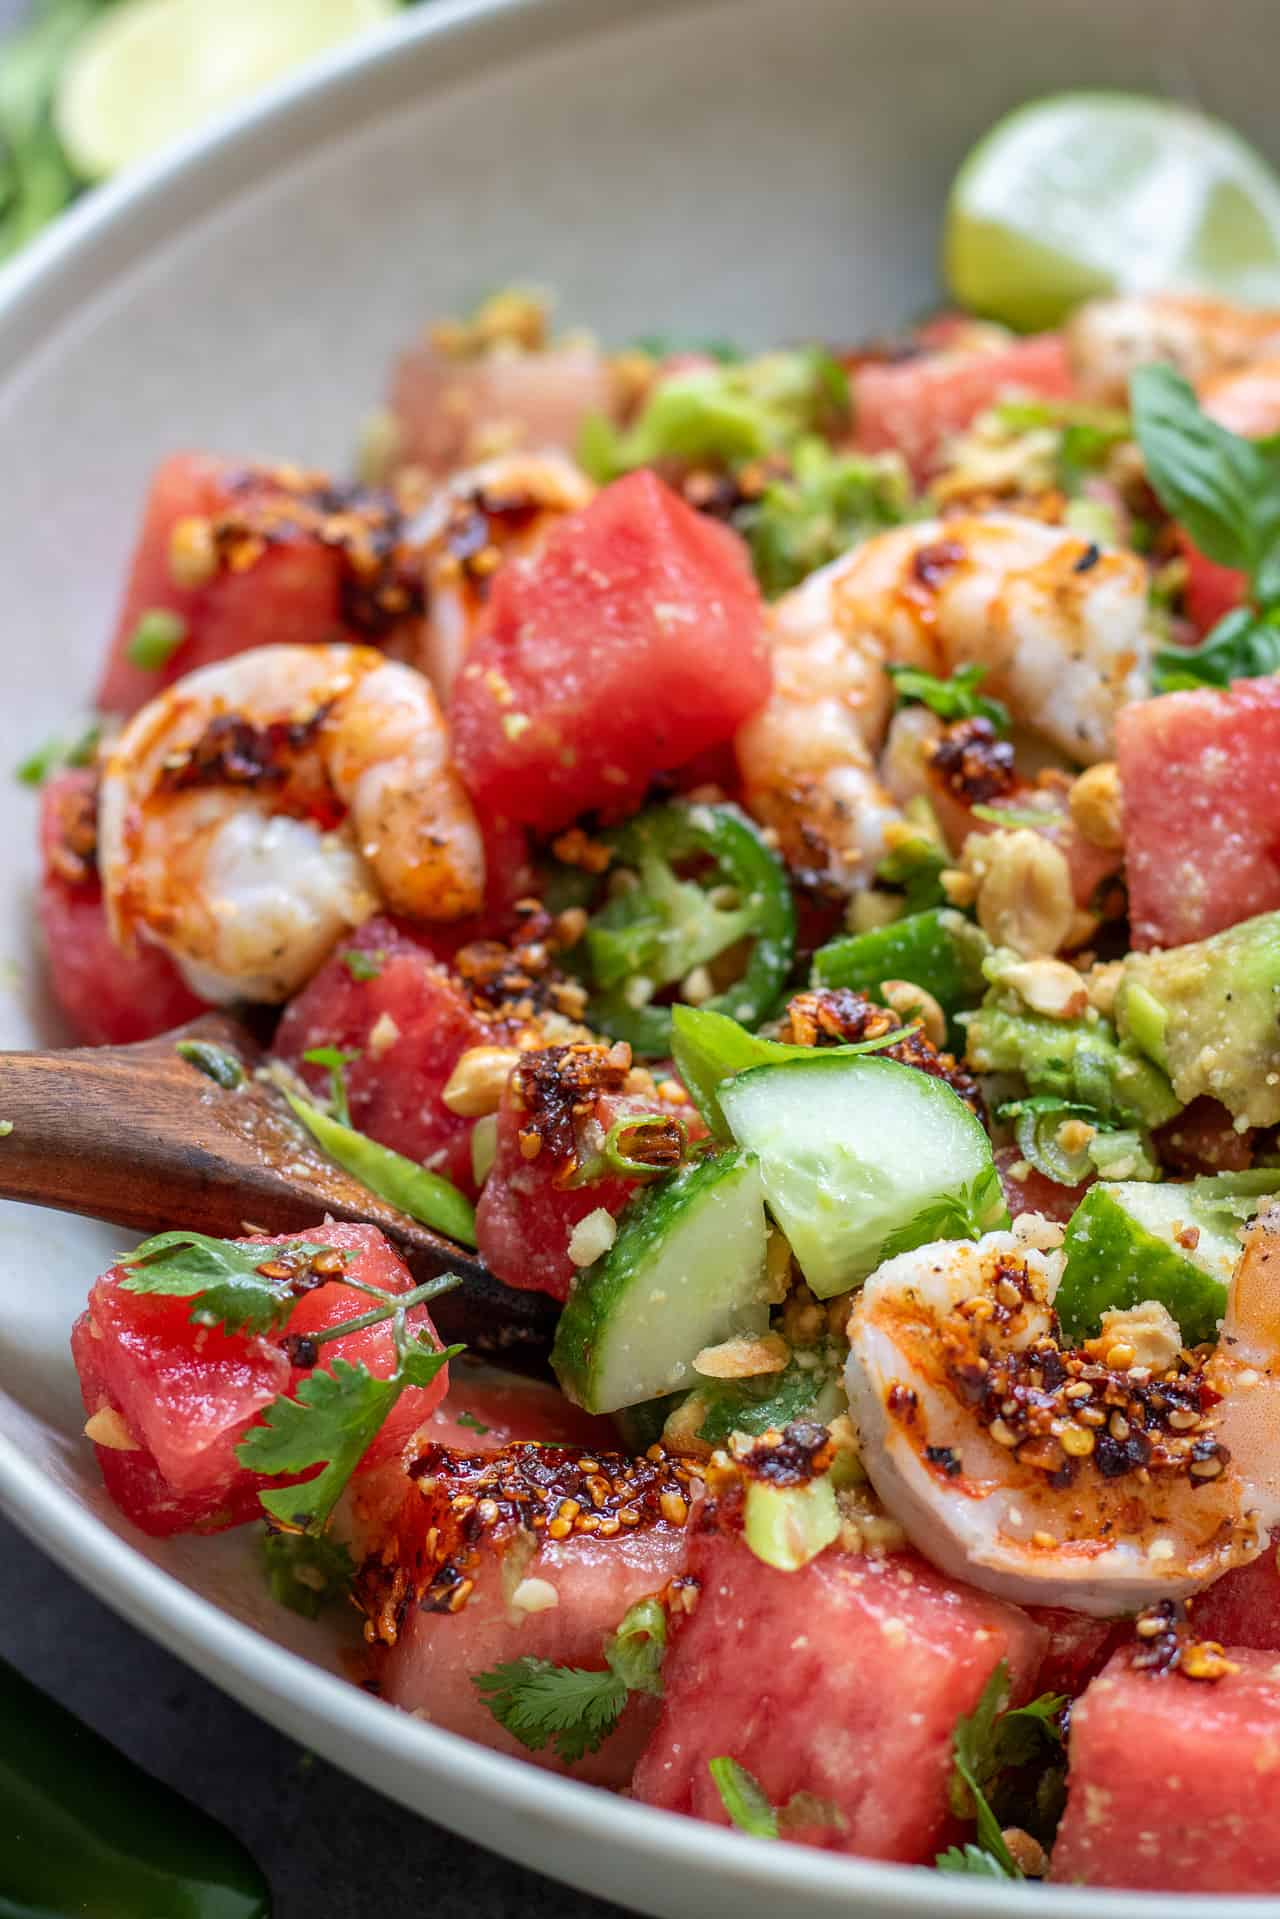 Watermelon salad with diced cucumbers, avocado and sliced jalapeño peppers. There's a wooden serving spoon in the salad bowl. It's drizzled with a chili crunch oil and topped with grilled shrimp.